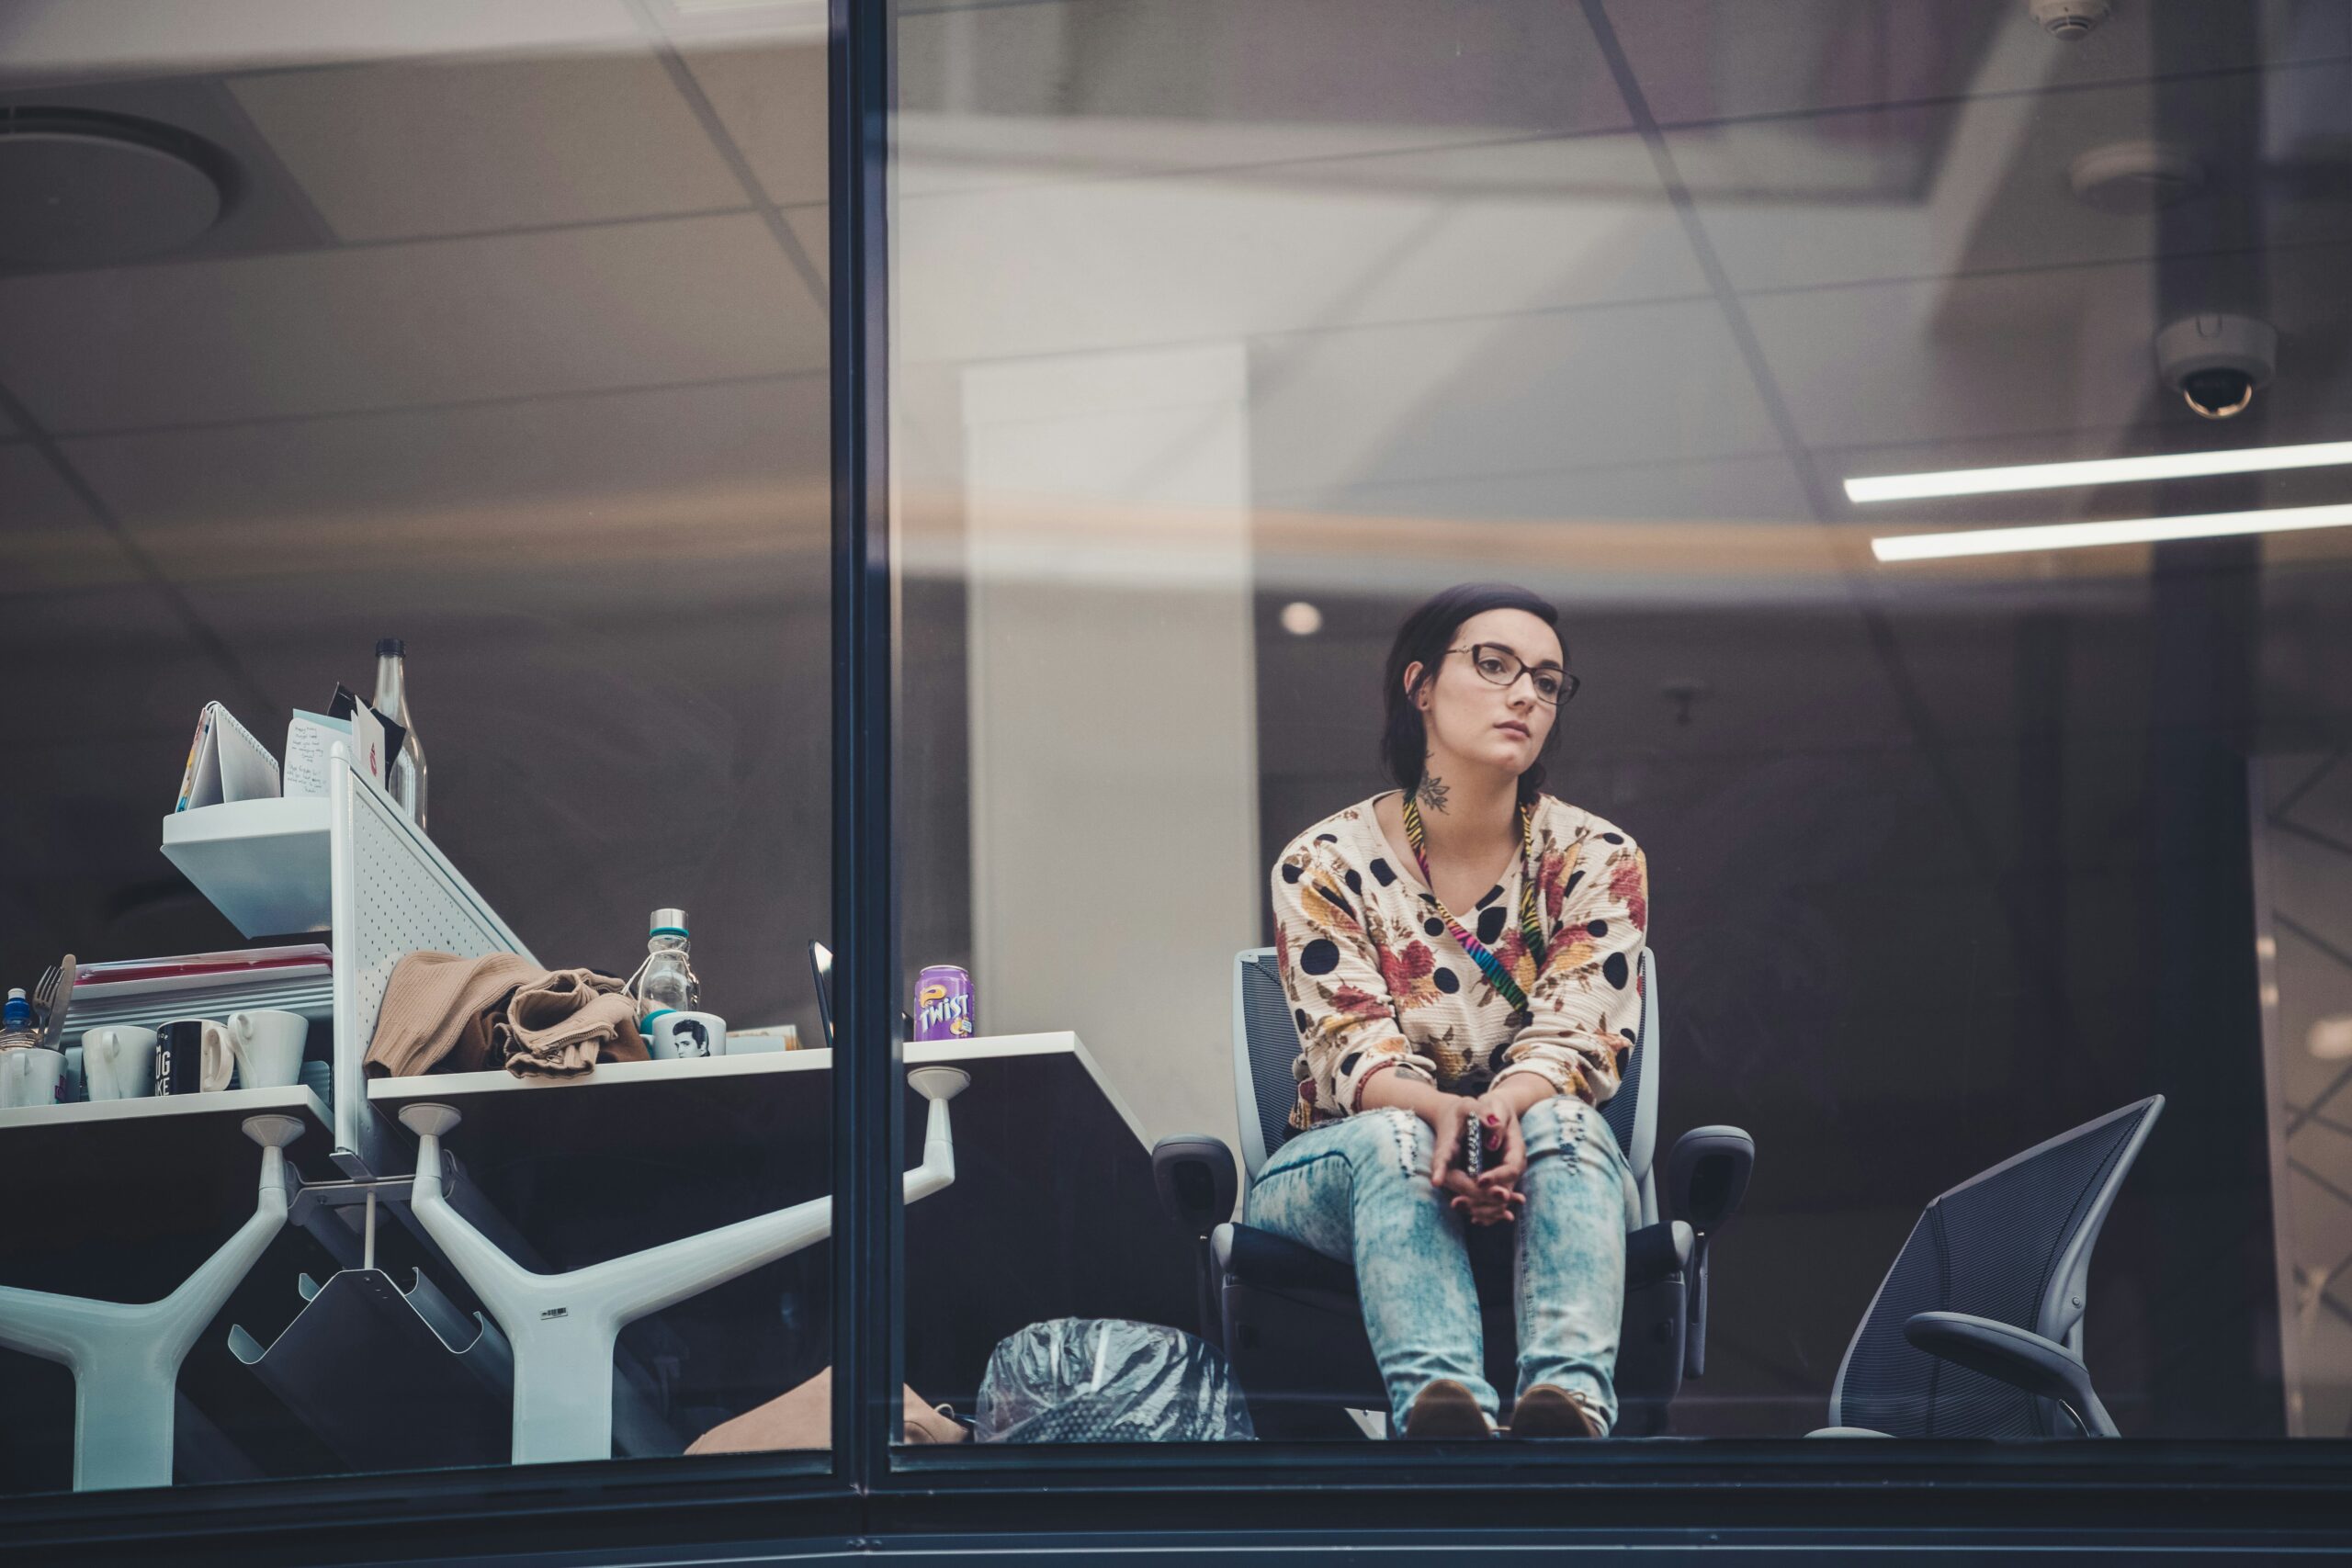 Women sitting in office looking bored and apathetic